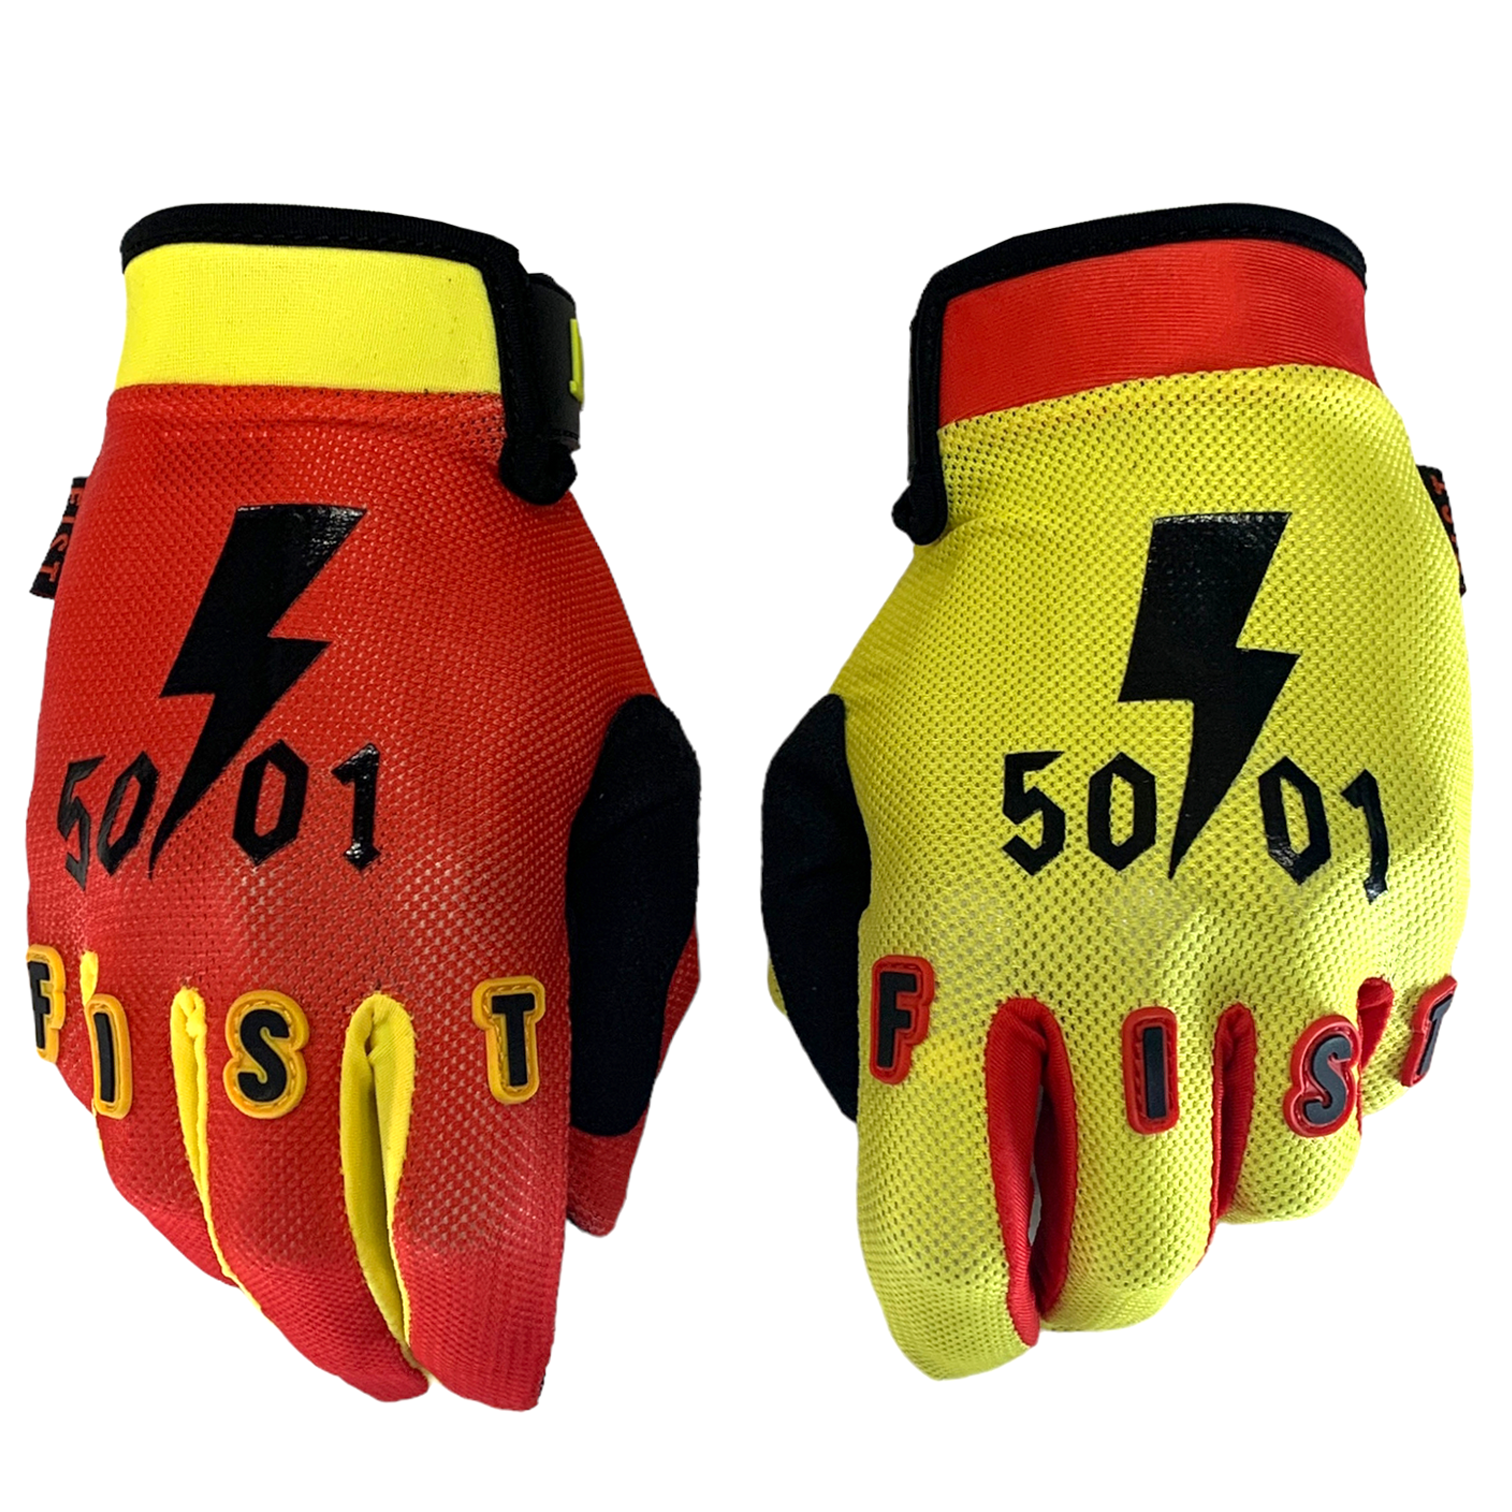 50to01 x FIST - LOUD GLOVES